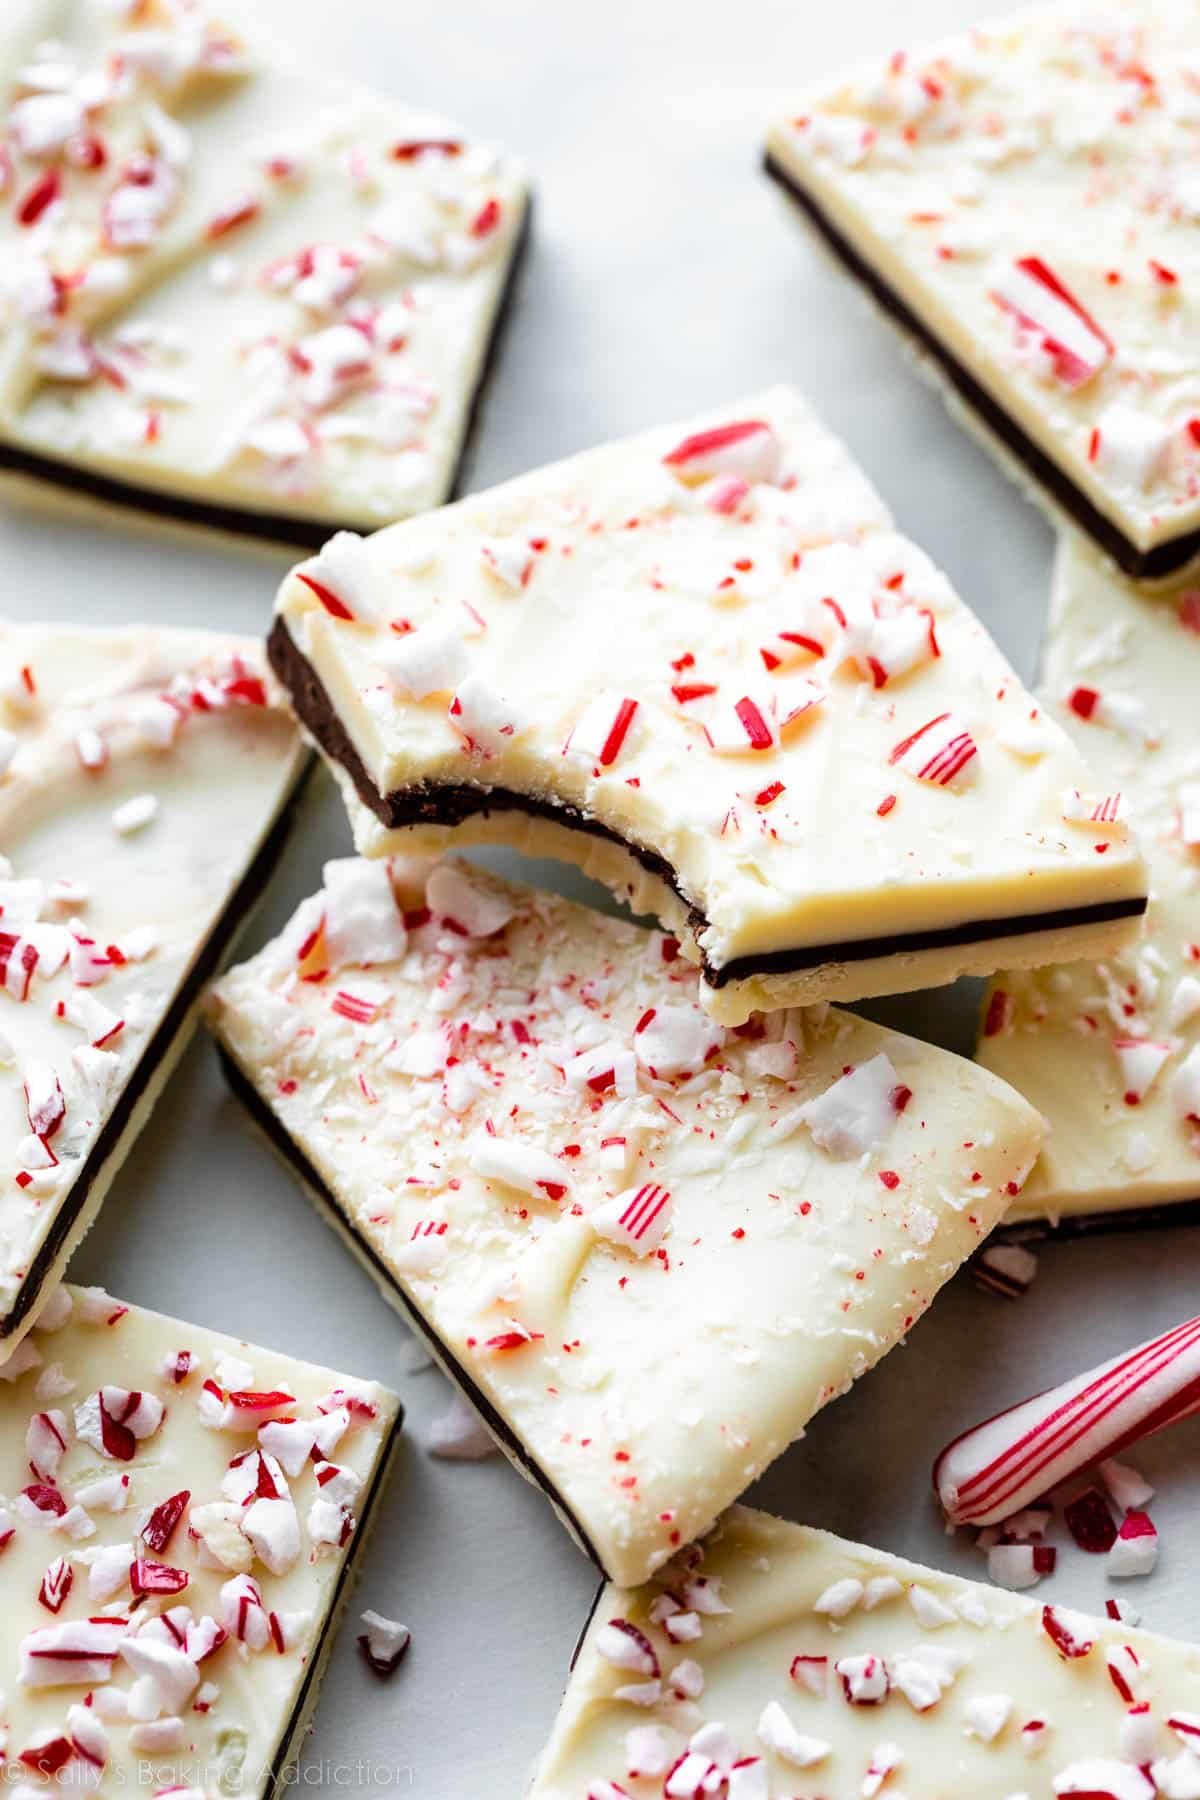 peppermint bark broken into pieces with crushed candy canes on top.